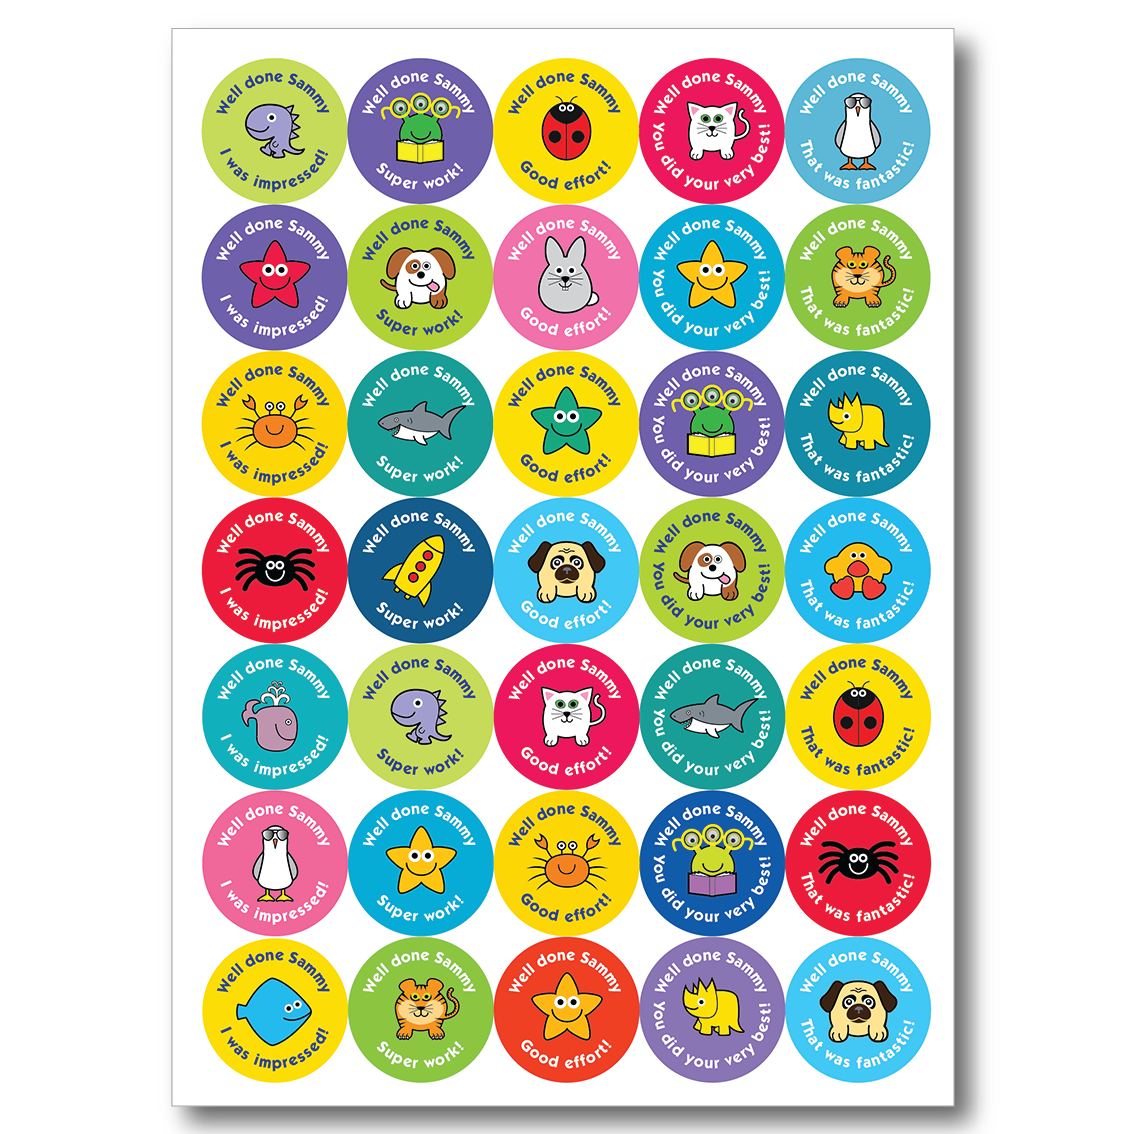 PERSONALISED HOME LEARNING SCHOOL WELL DONE REWARD LABEL STICKERS PJ MASKS 